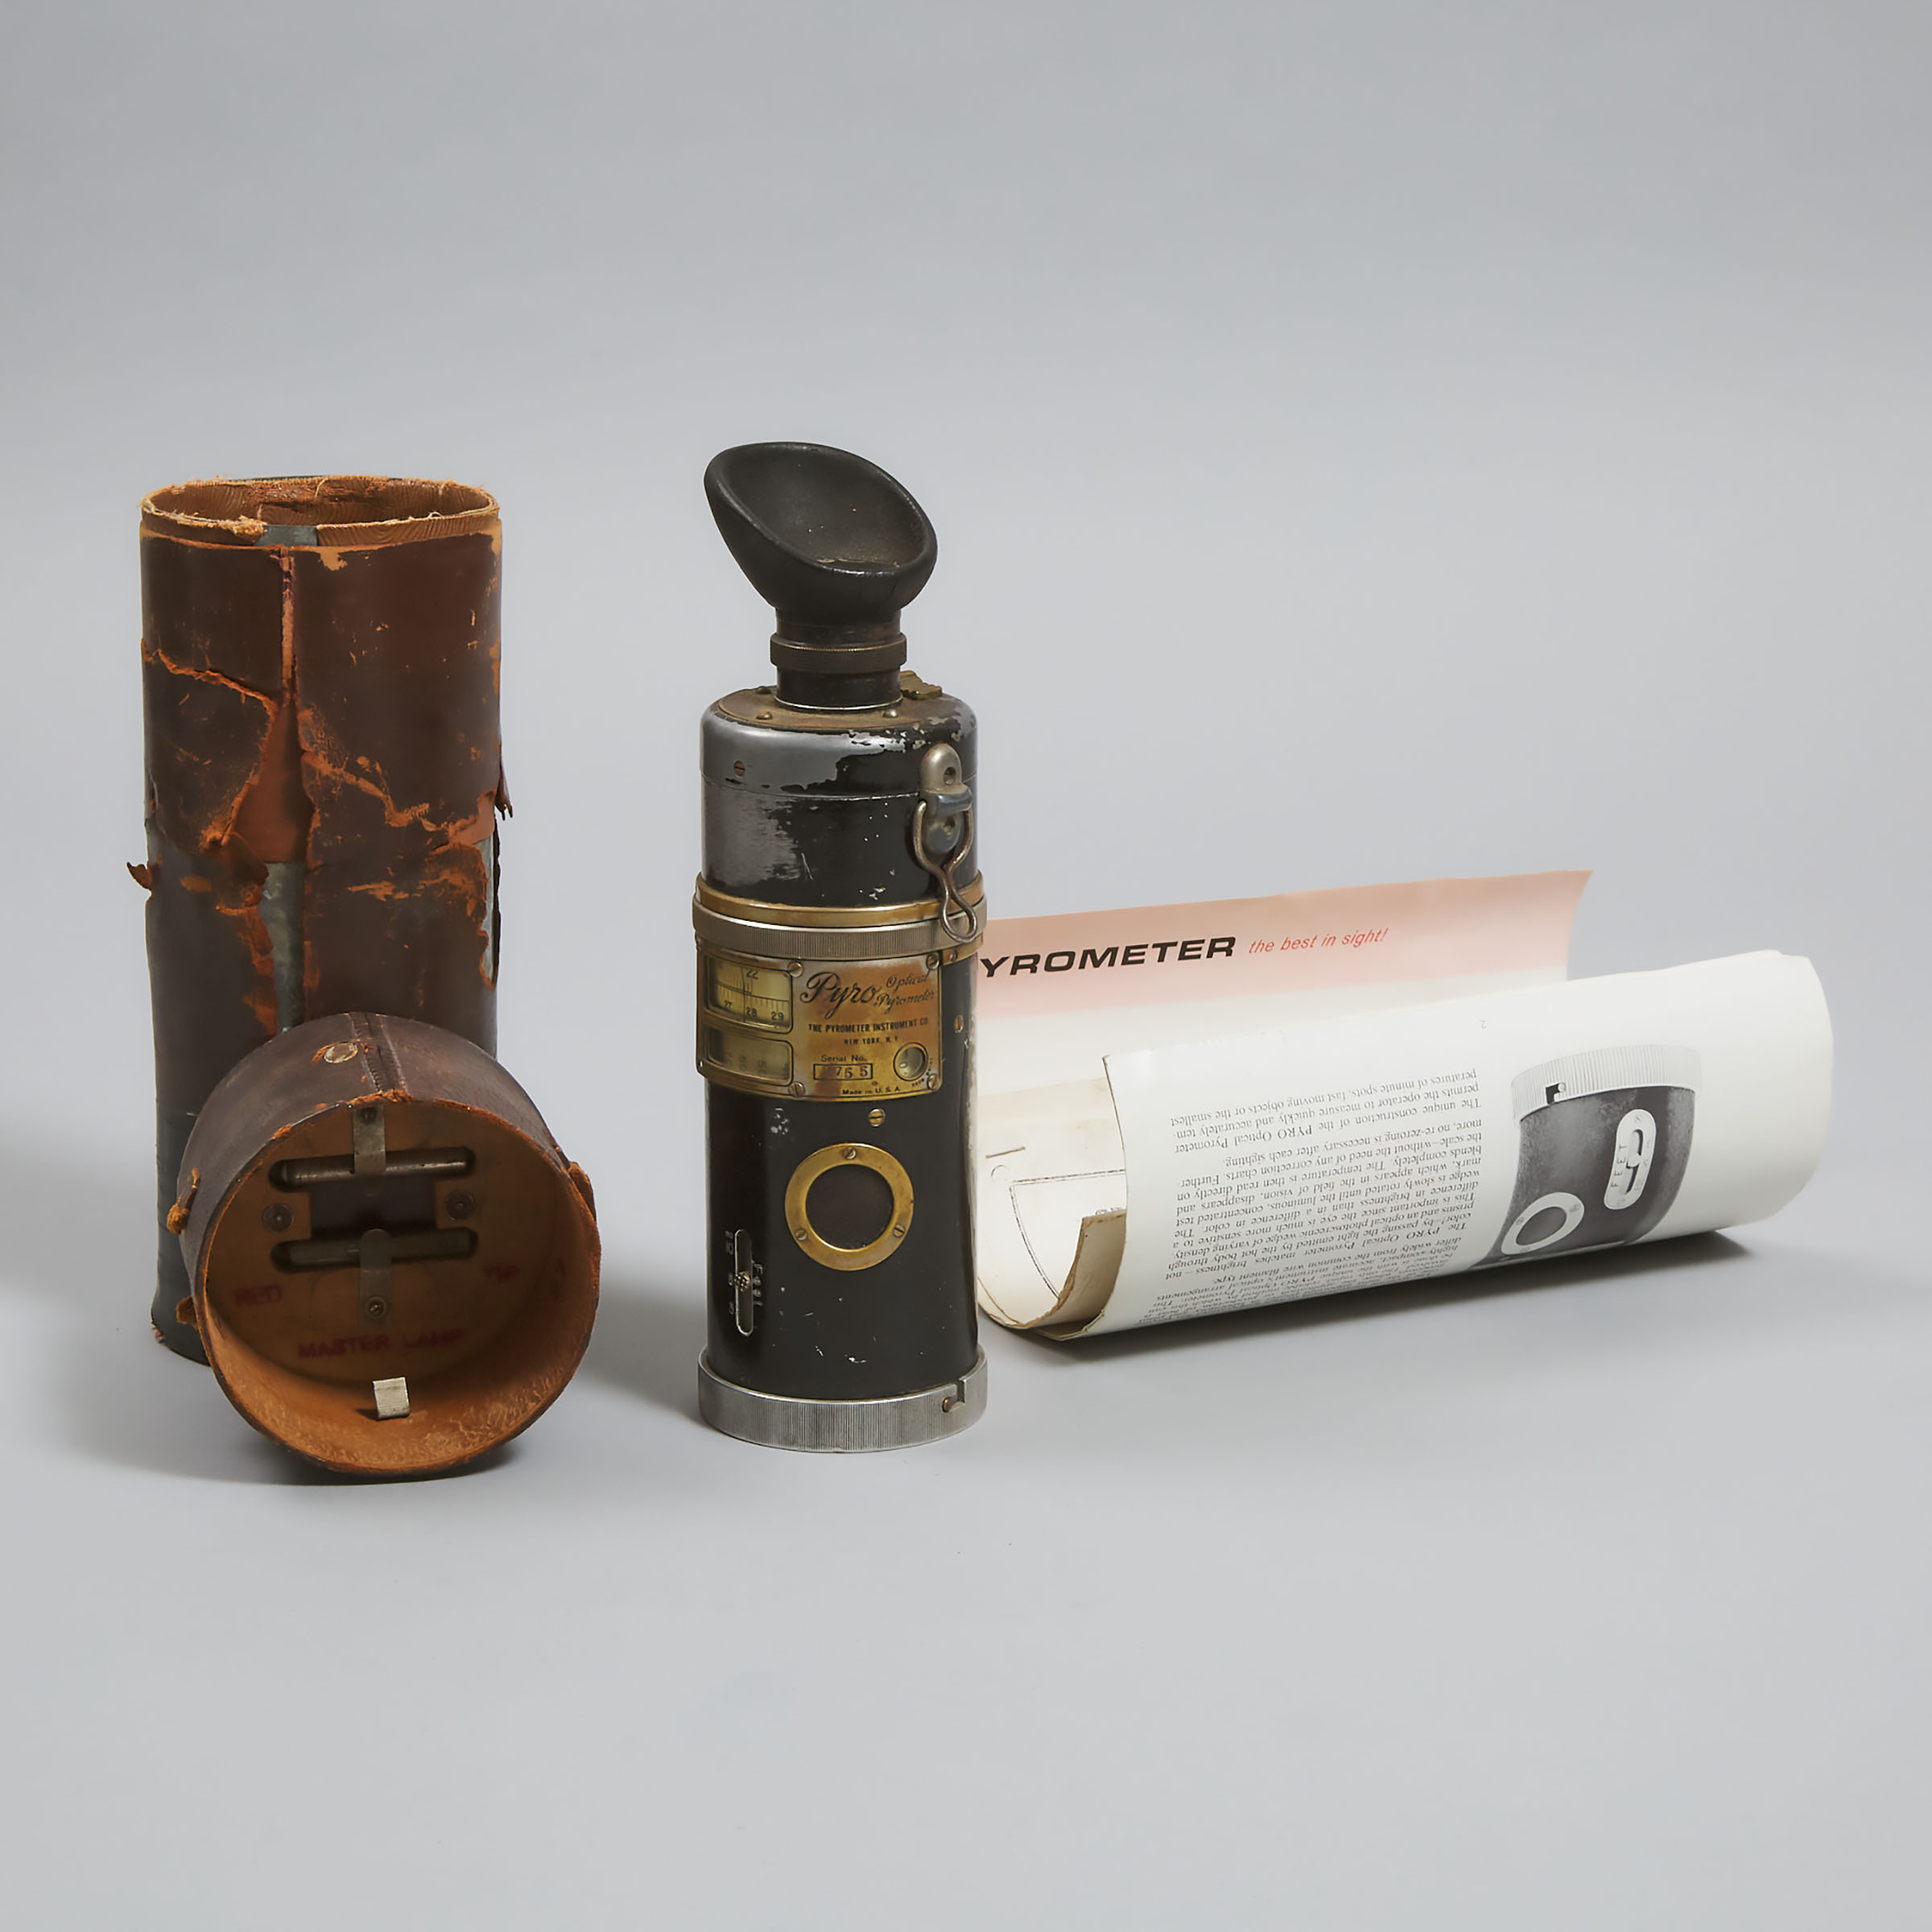 Glass Blowpipe and a Pyro Optical Pyrometer, mid 20th century